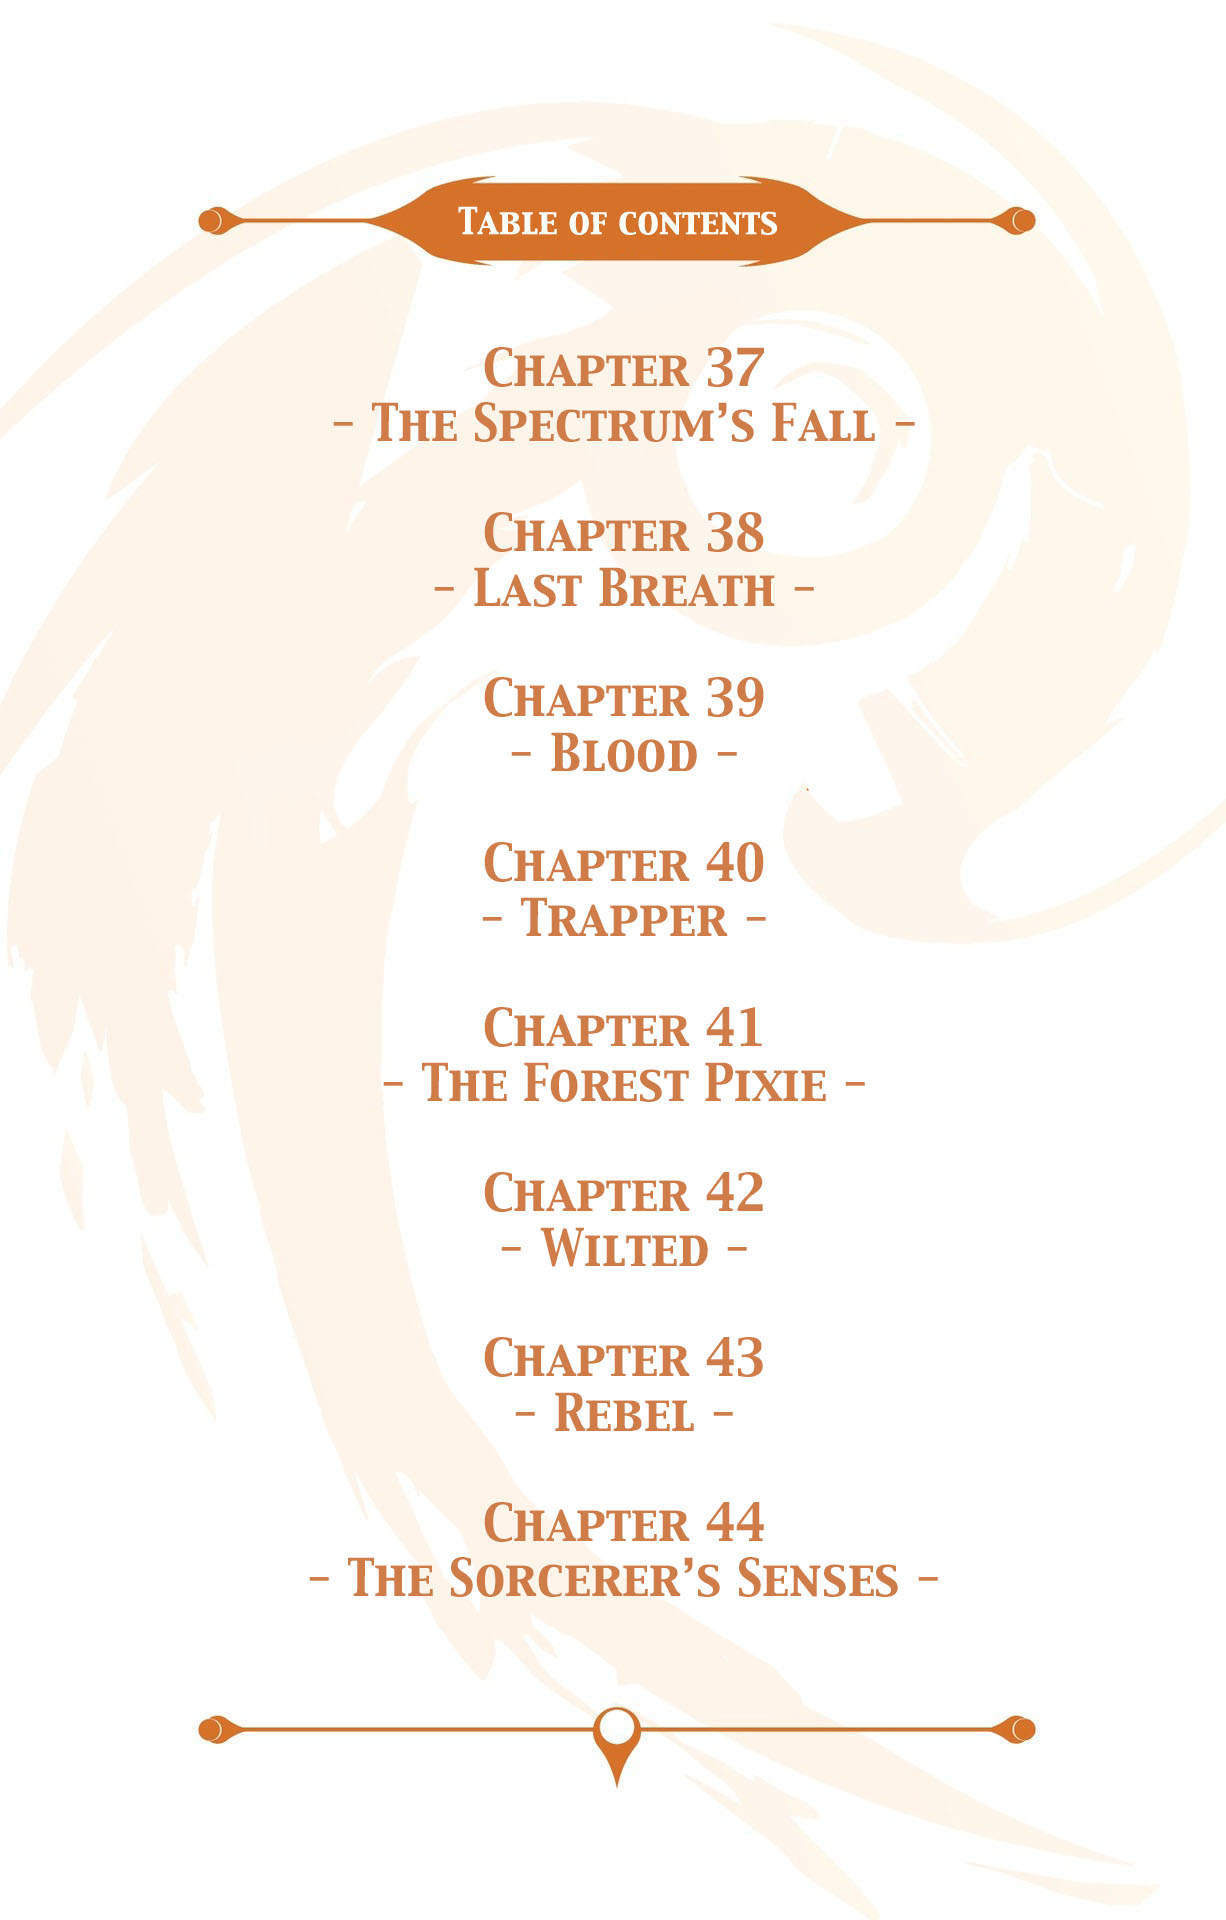 Radiant Vol. 6 Ch. 37 The Spectrum's Fall